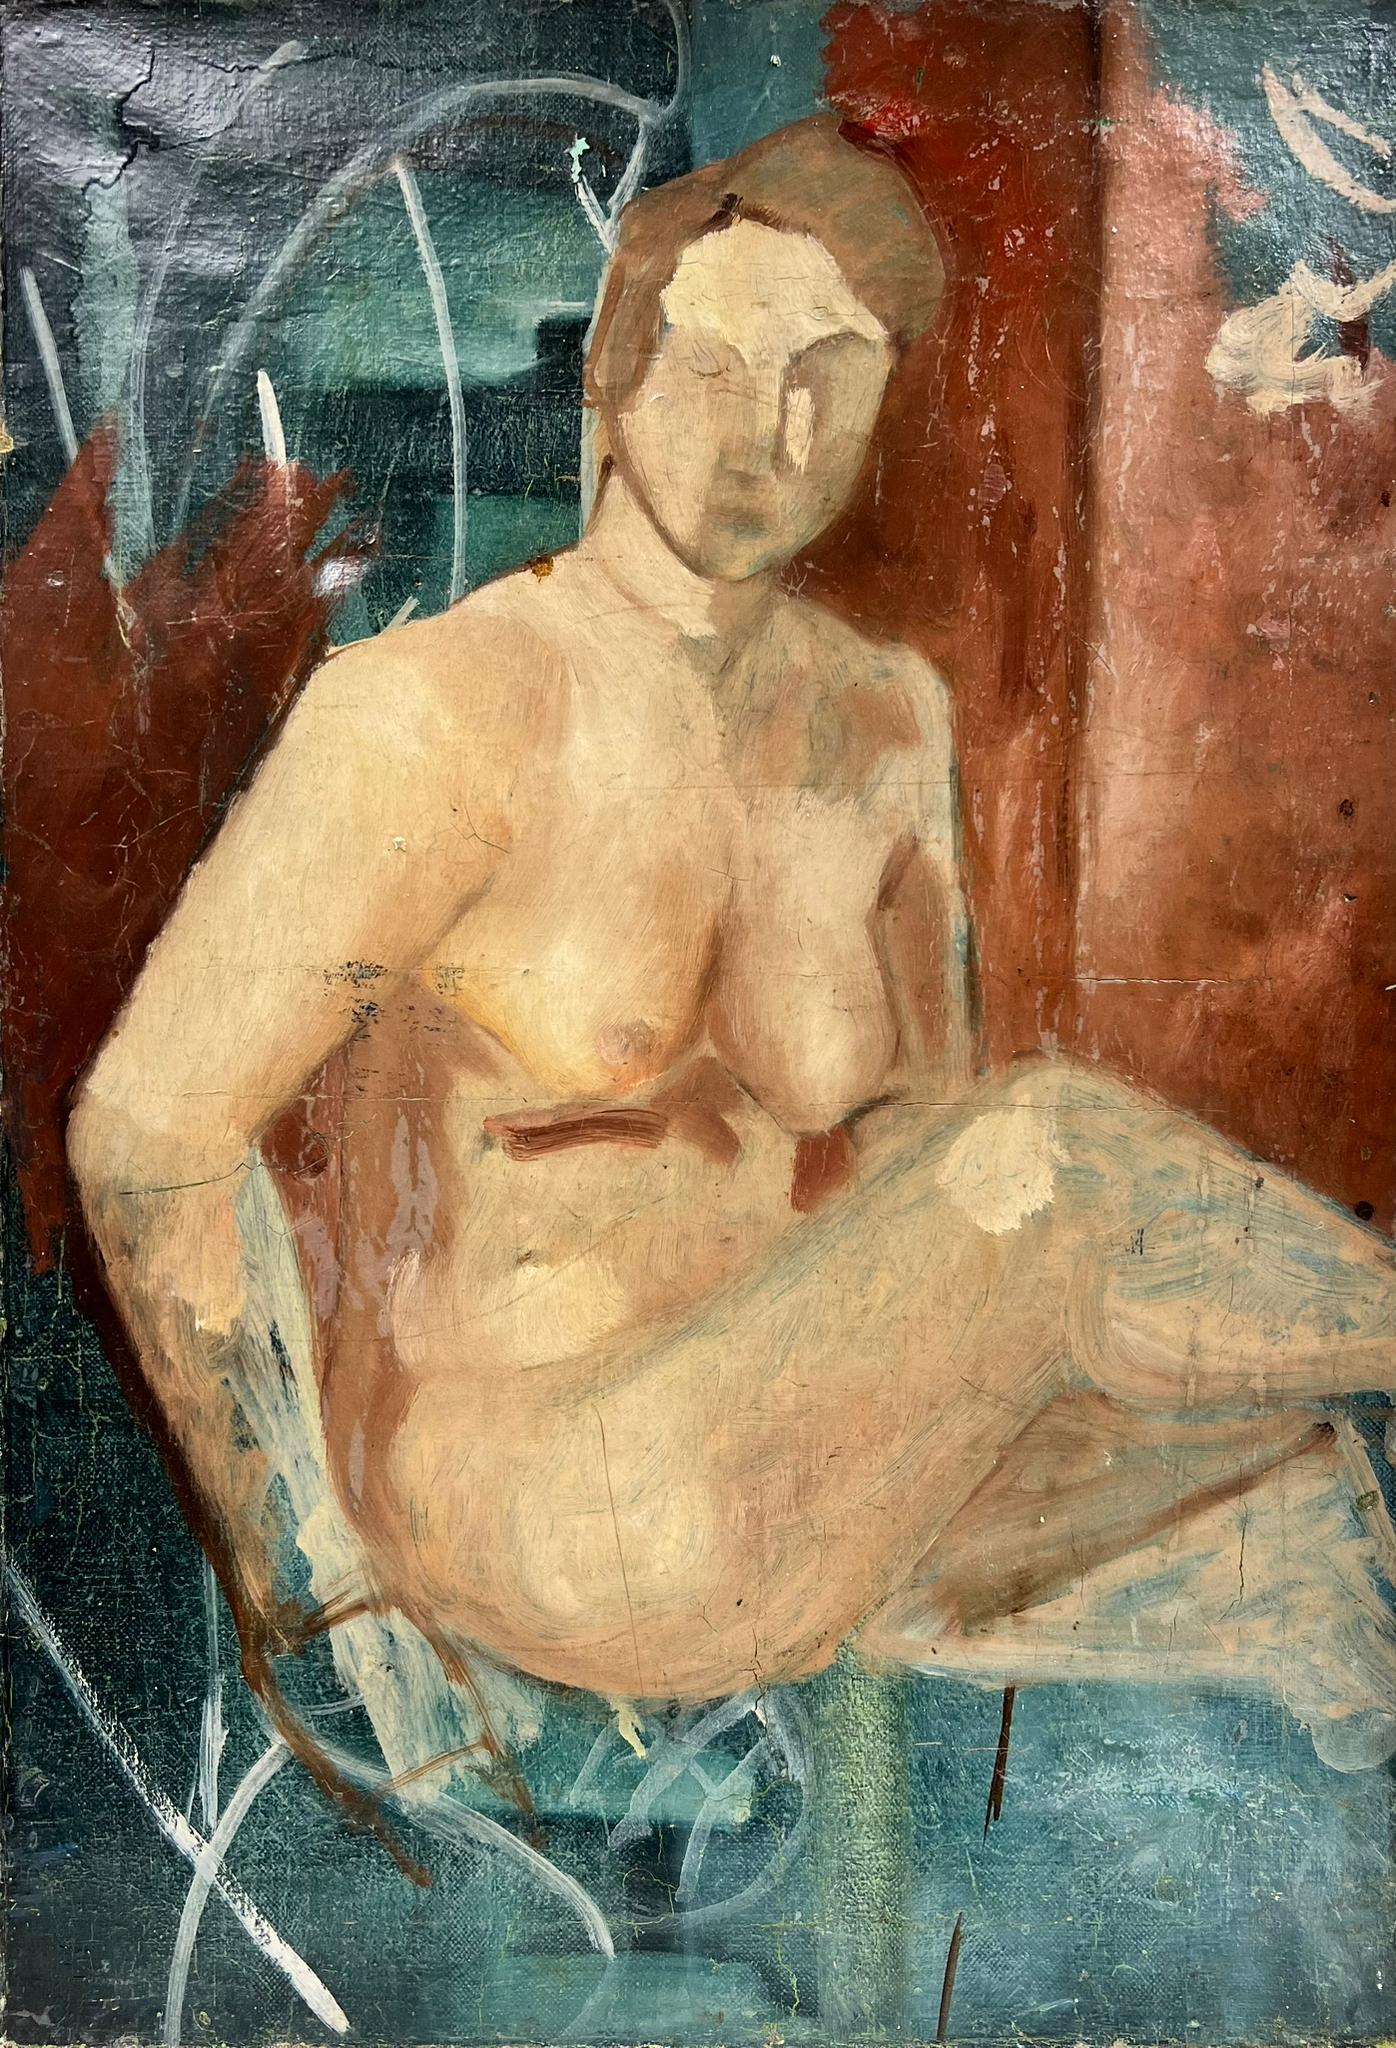 The Nude Model
French School, 1930's
oil on canvas
21.5 x 15 inches
double sided work
provenance: private collection, Paris
The painting is in sound condition, some former restoration work and minor indents to the surface. 
